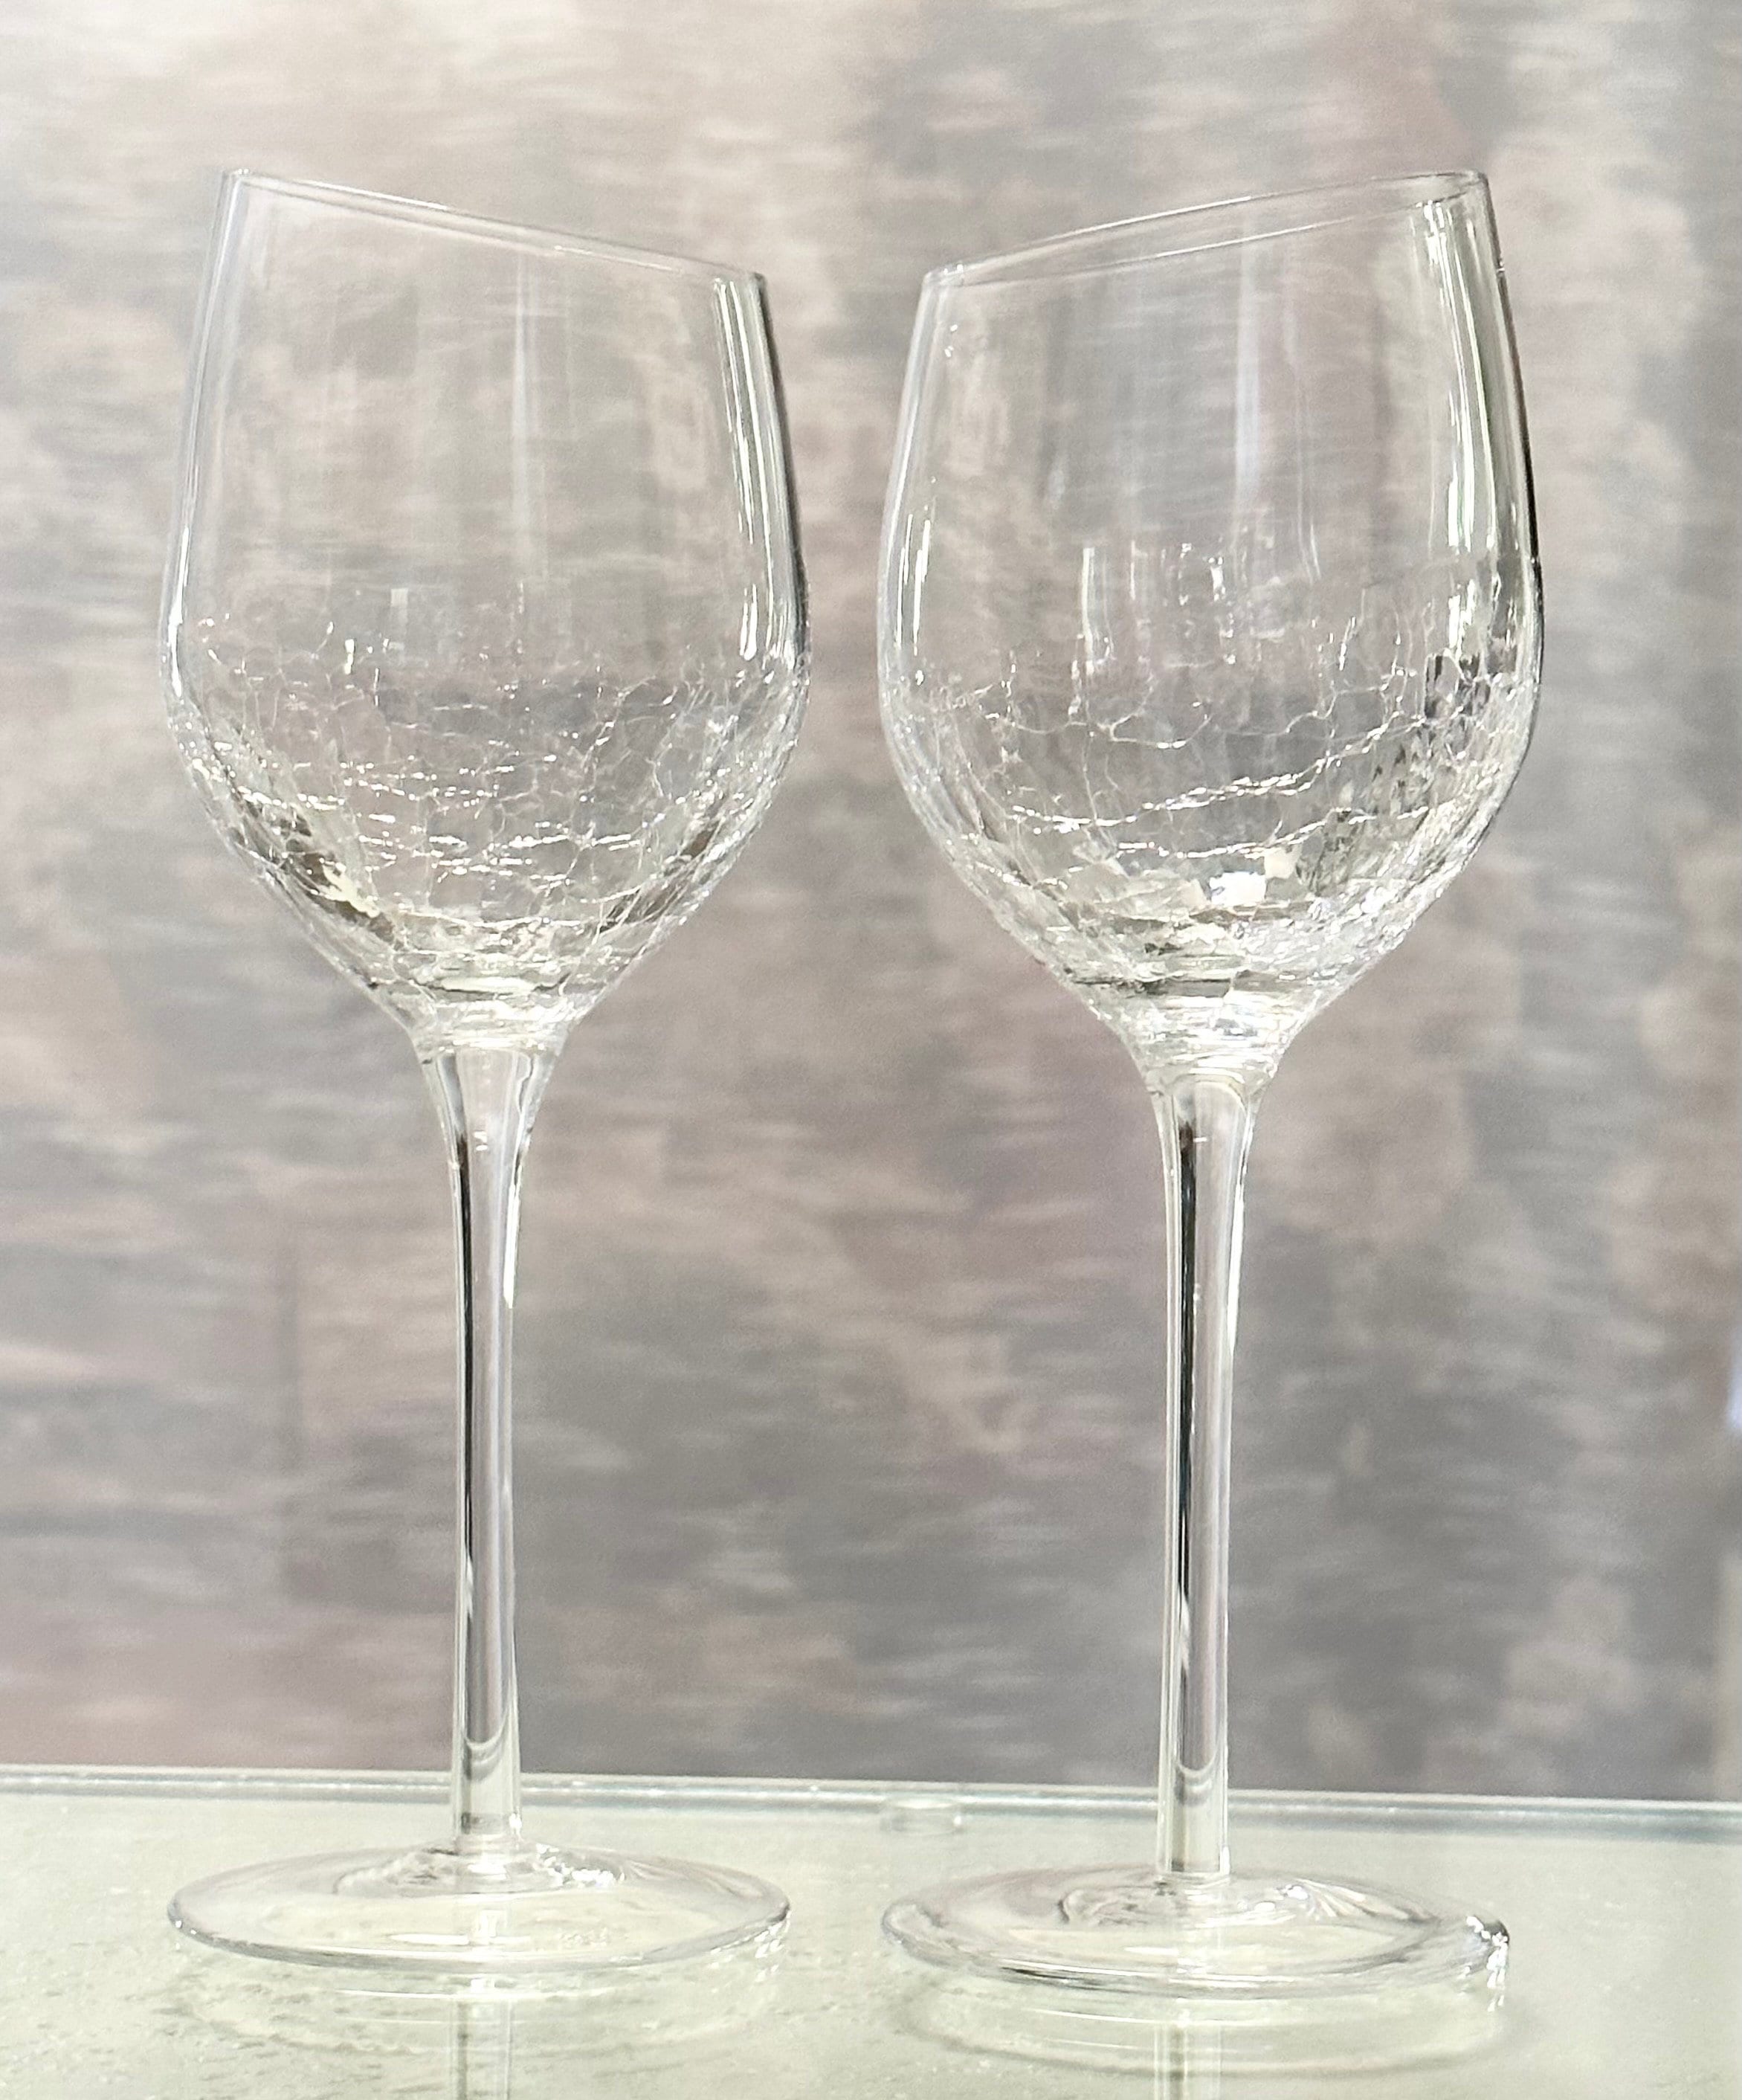 Wine Glass / Angled Rim Glass / Clear Crackle Glass / Pier 1 Wine Glass /  Hand Blown Glass / Vintage Glass / Barware Glass / Collectible